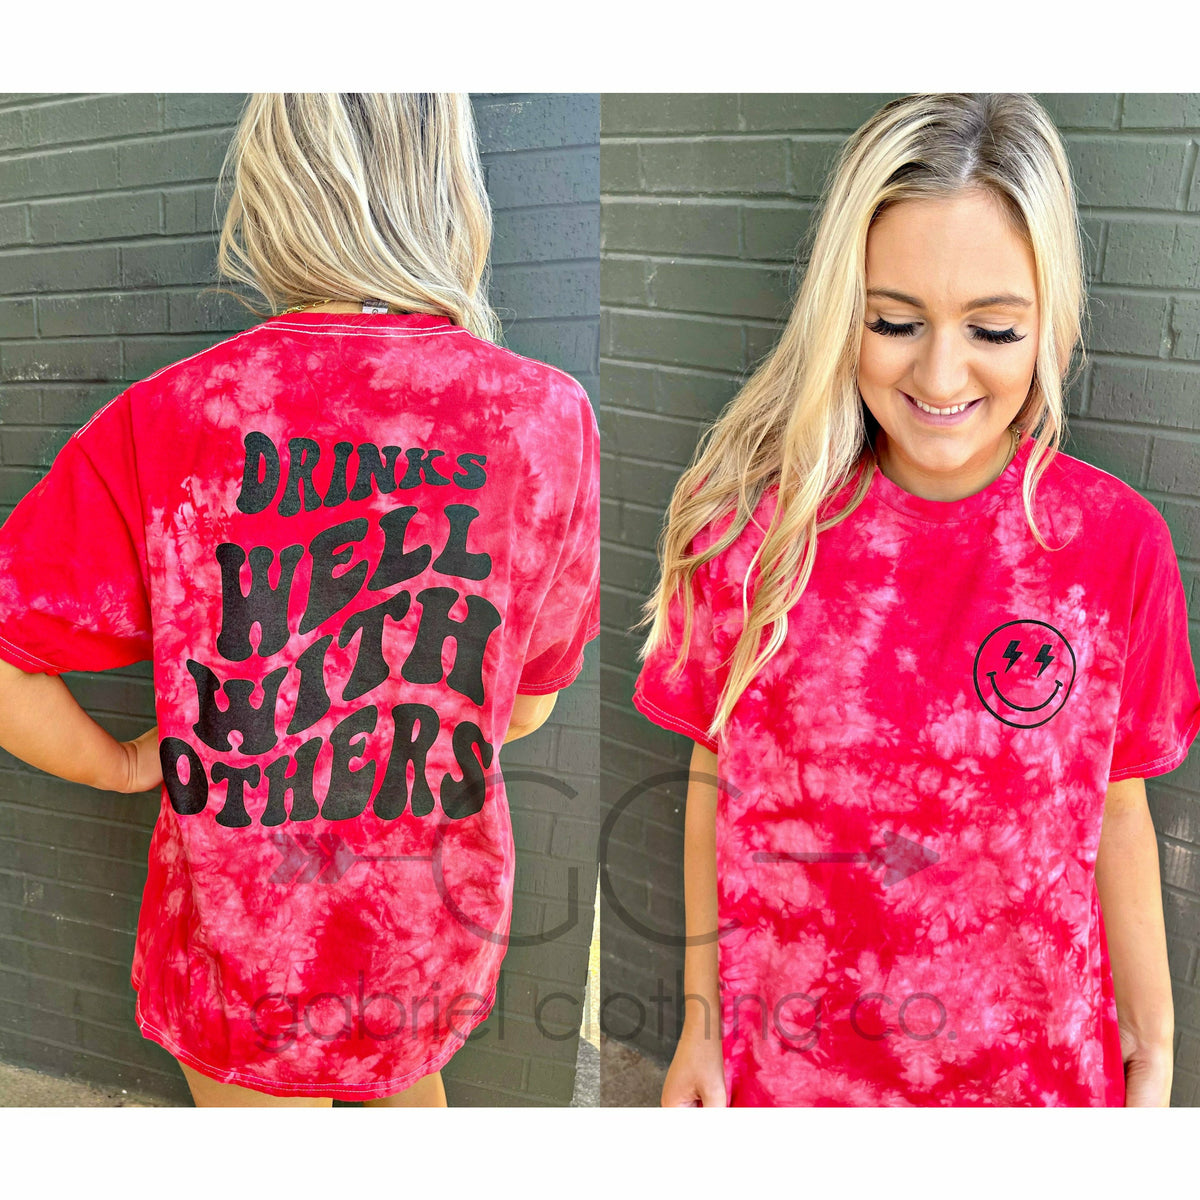 Drinks well with others Red Tie Dye tee